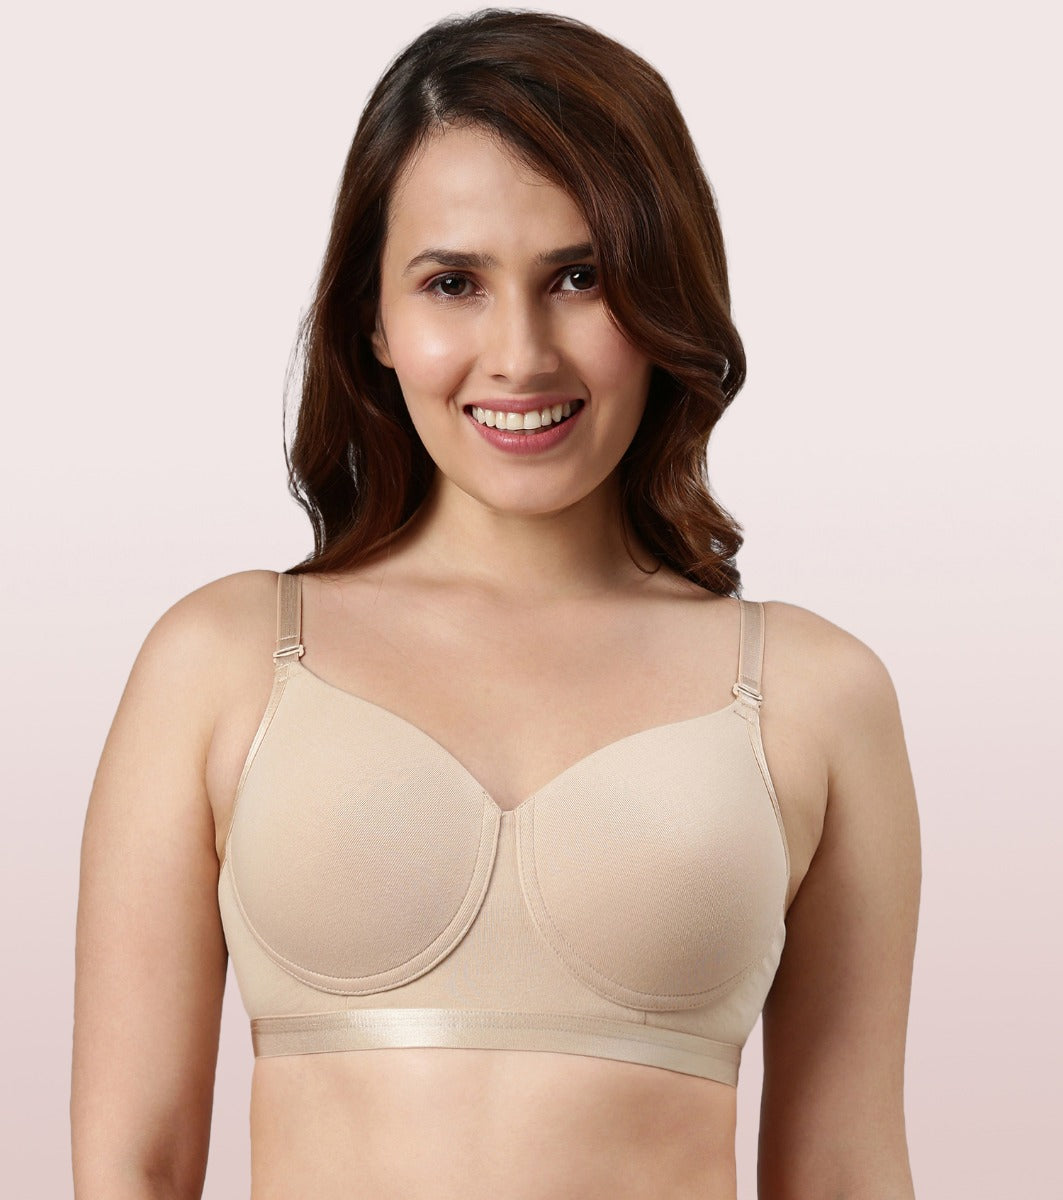 Enamor Fab-Cool A165 Antimicrobial Ultimate Coverage Cotton T-shirt Bra for Women- High Coverage, Padded and Wirefree - Pale Skin